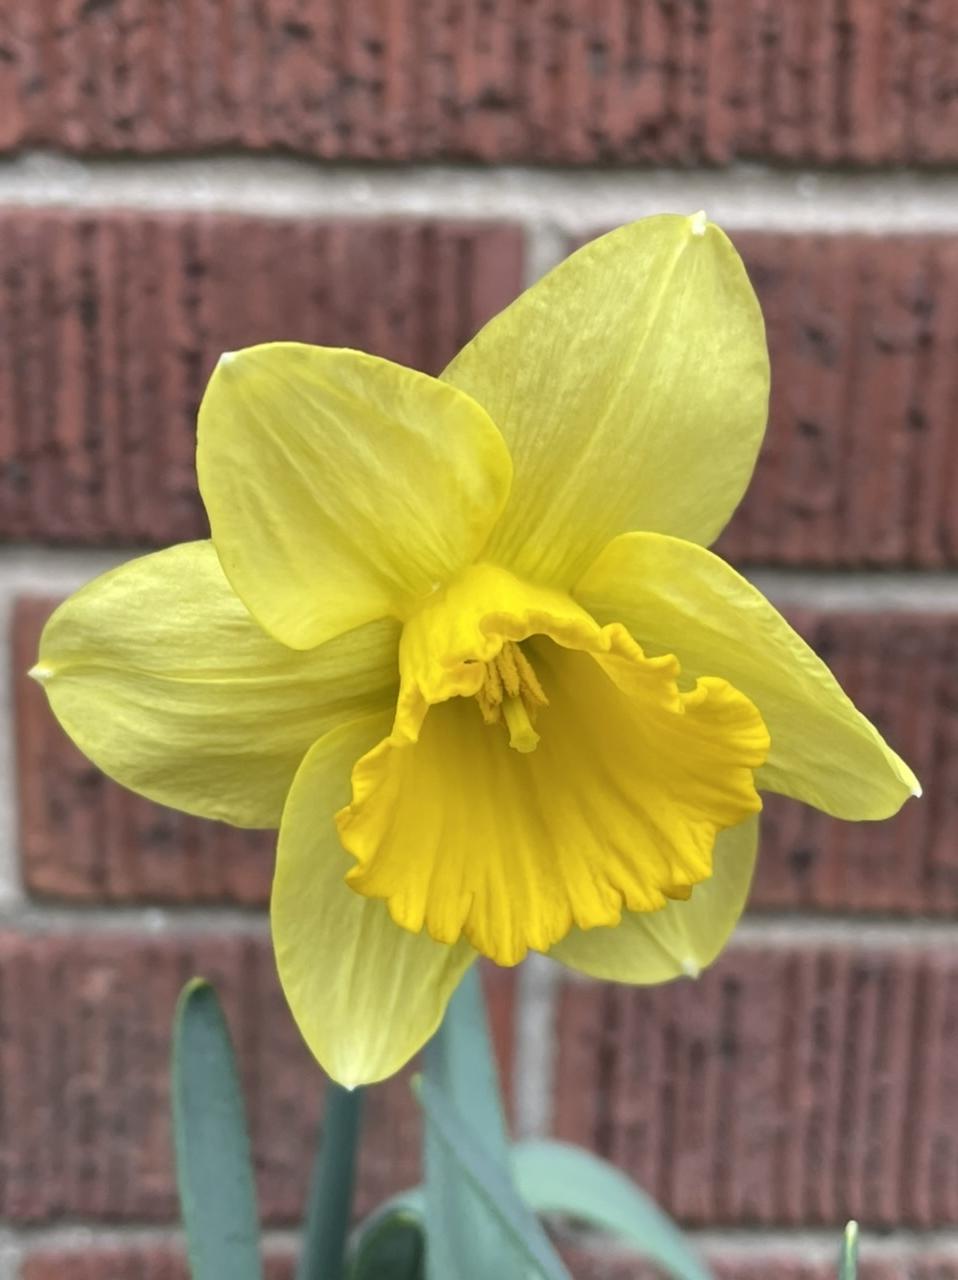 Daffodil in front of red bricks